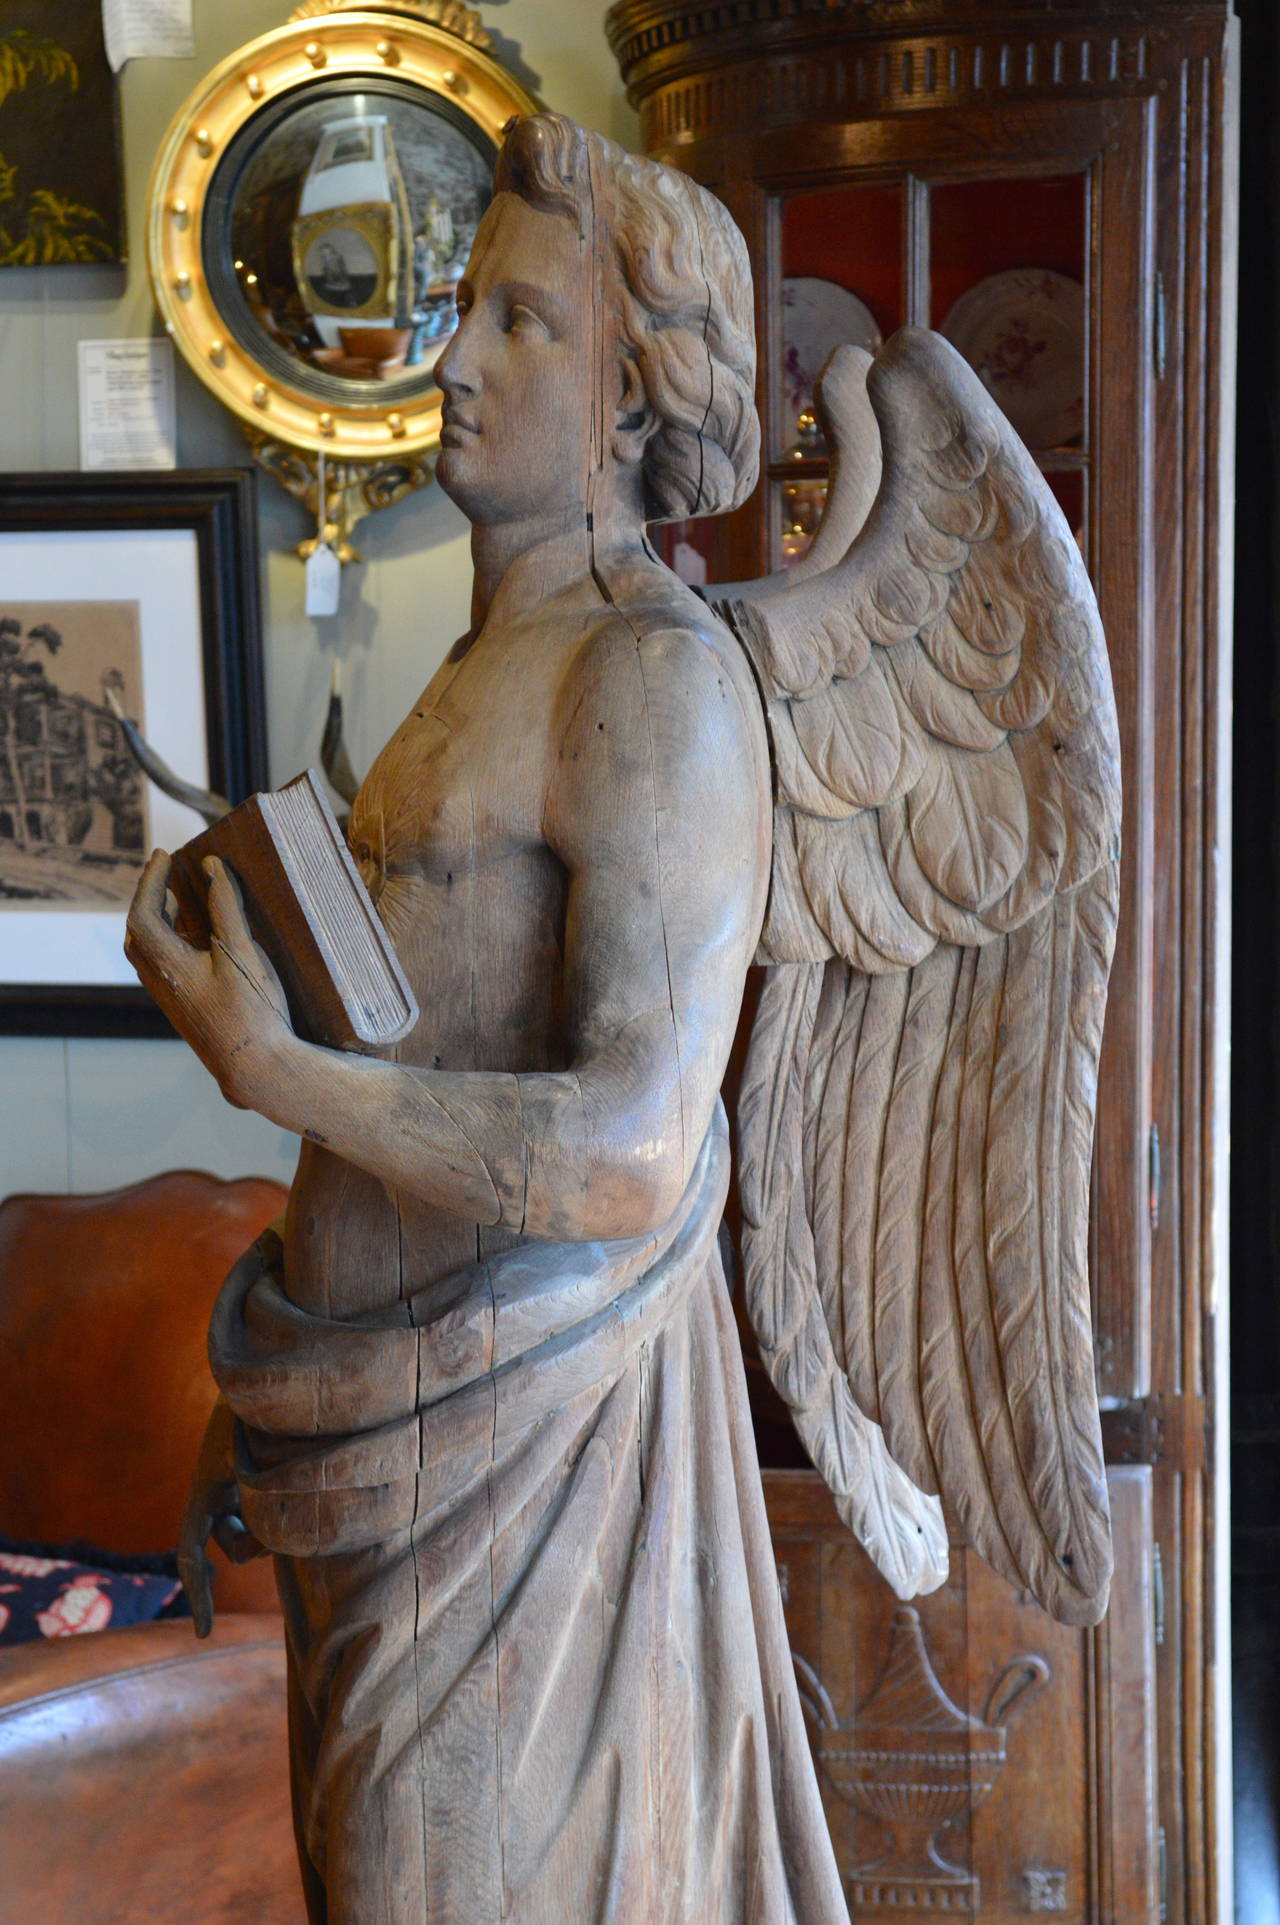 19th century carved figure of Archangel St. Uriel in laminated and carved white oak, unusual carving of sun medallion on chest with attached wings, Book represents wisdom, probably carved for Anglican church probably from England, found in Wisconsin.